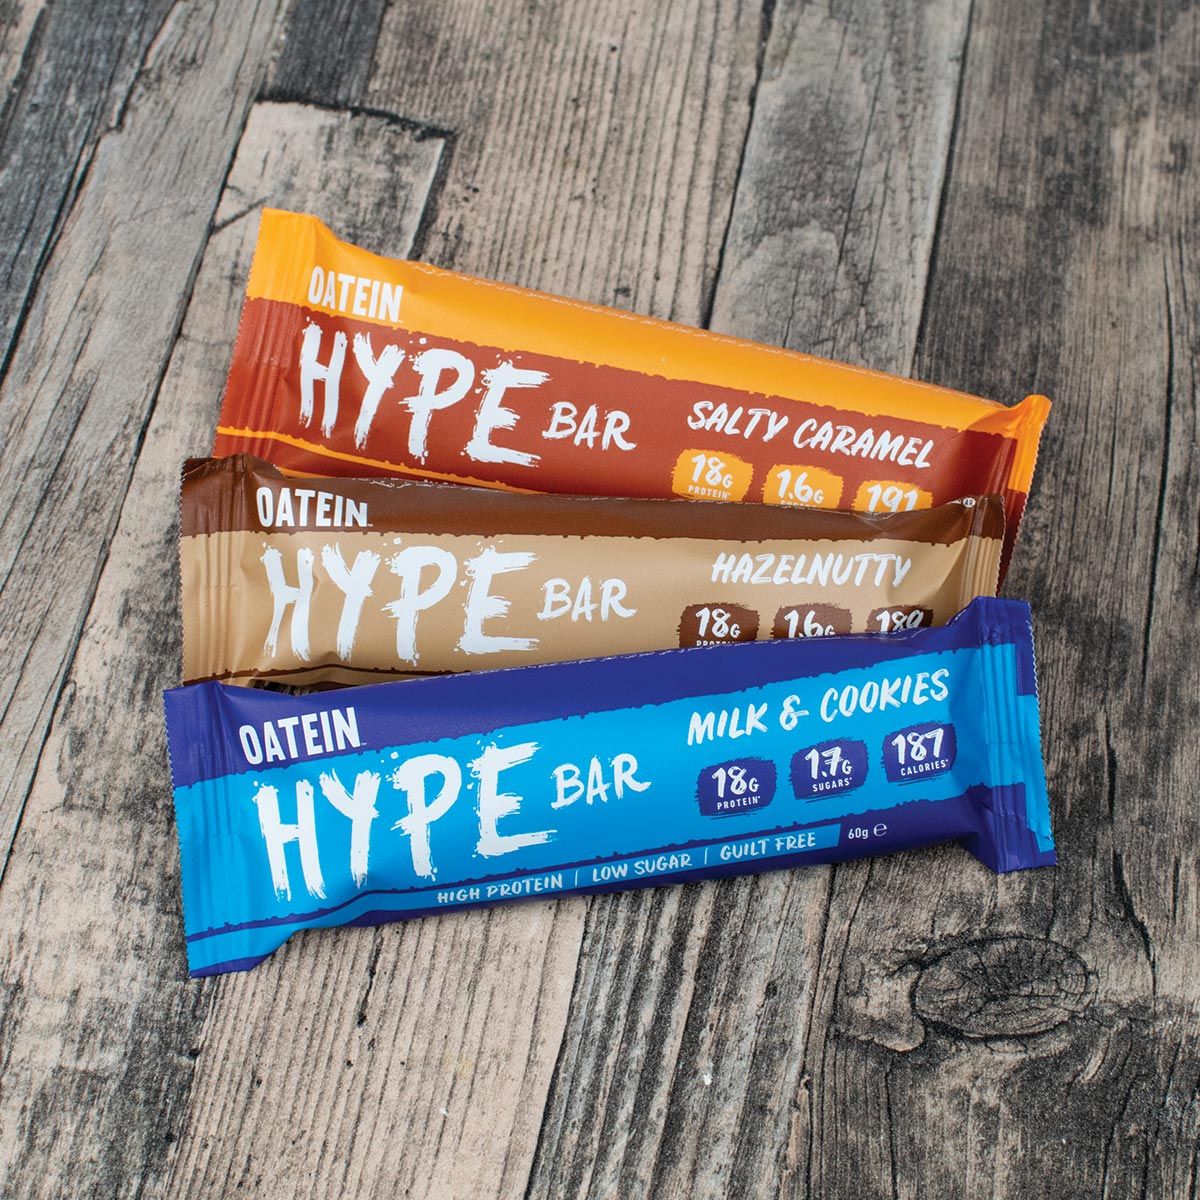 Hype Protein bars